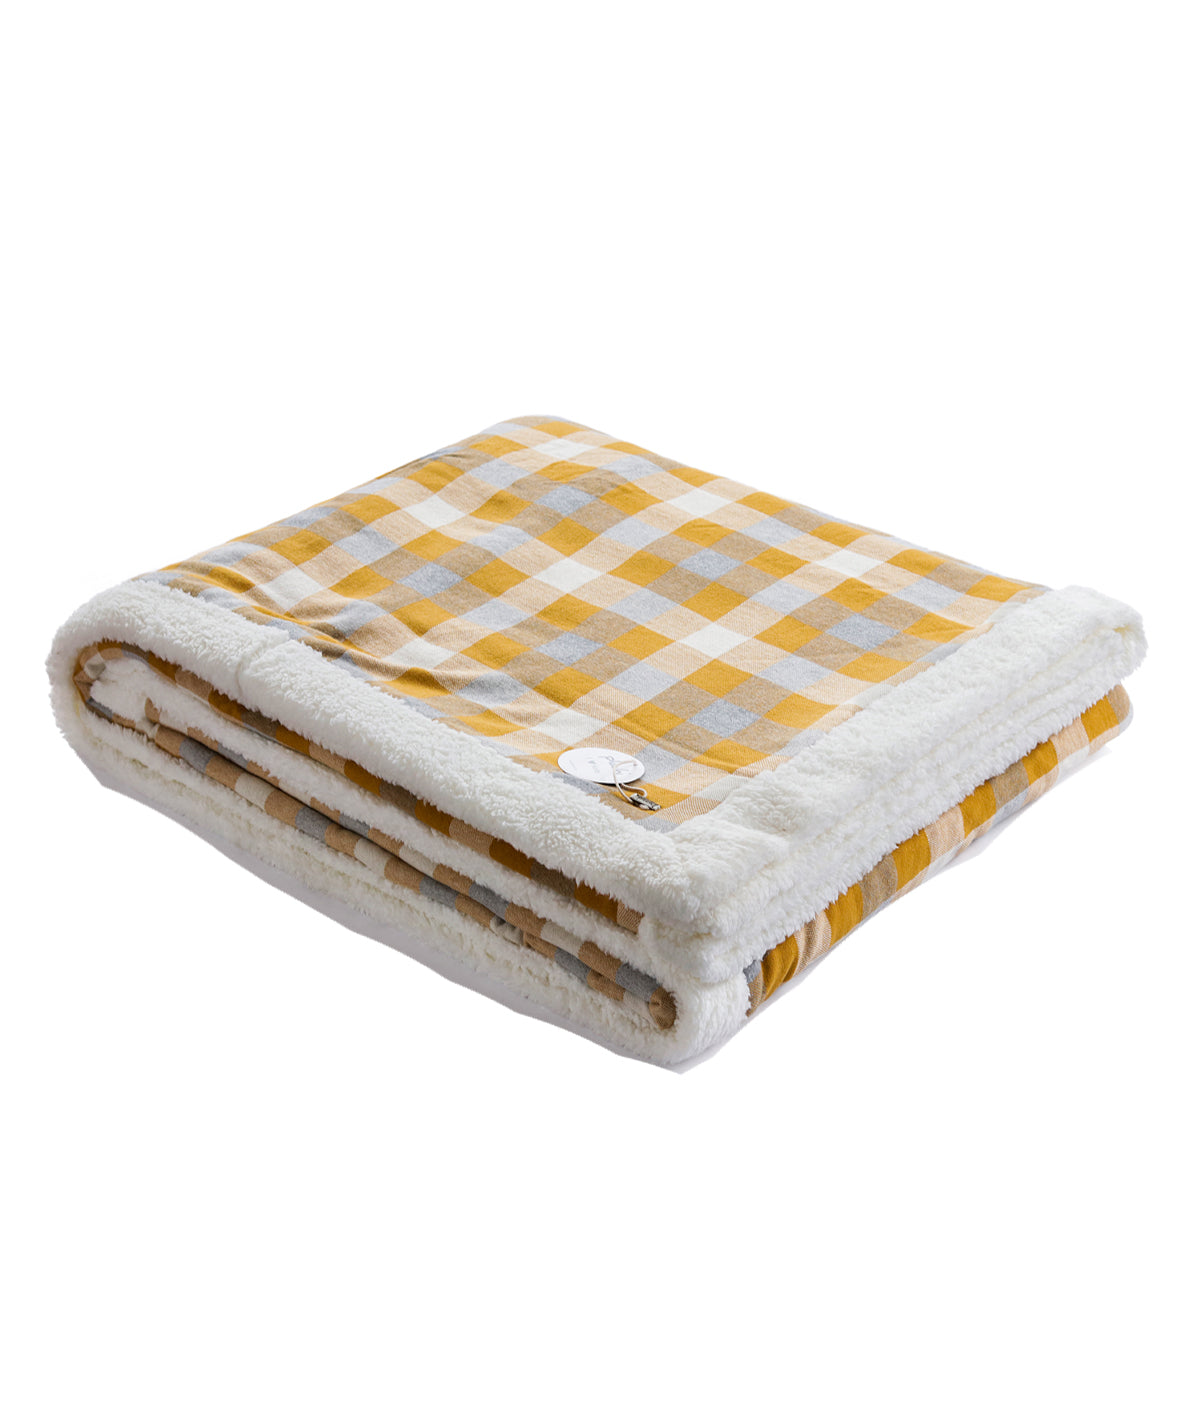 Multichecks Double Bed Warm Blanket with Cotton Knitted Front and Sherpa Fabric Back (Mustard & Natural)